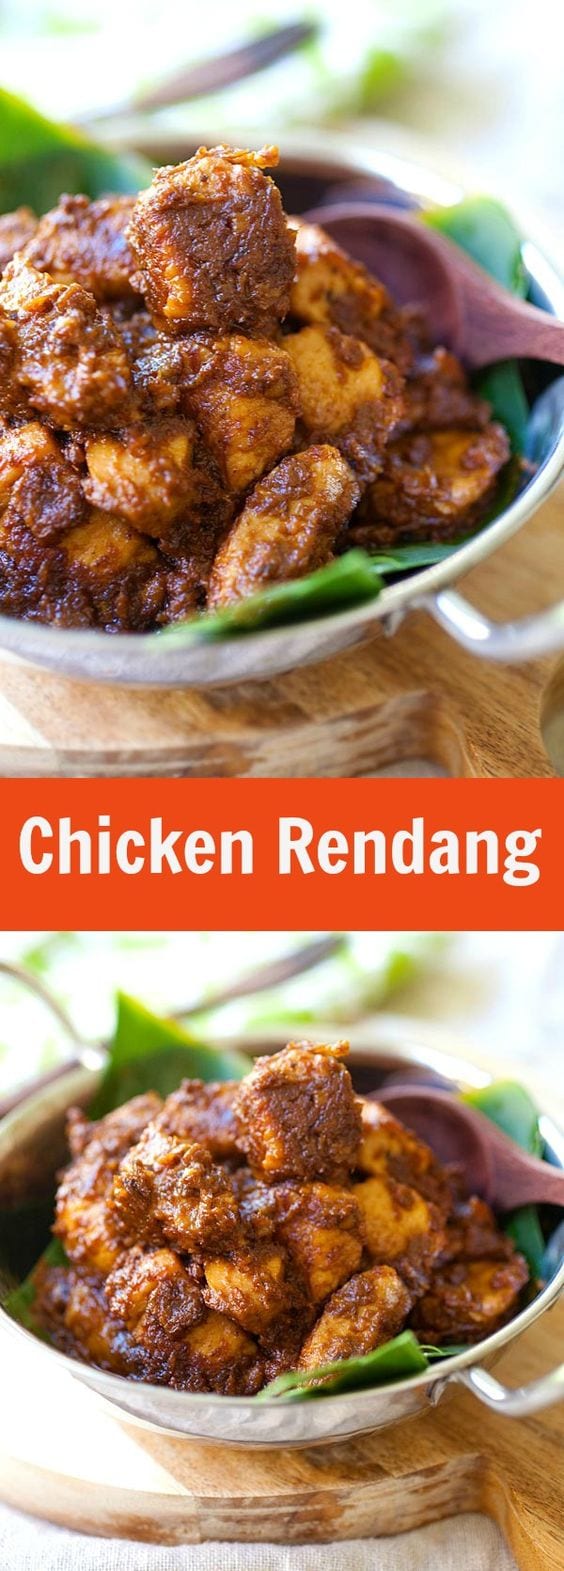 Chicken Rendang – amazing Malaysian-Indonesian chicken stew with spices and coconut milk. Deeply flavorful. The best rendang recipe ever! | rasamalaysia.com